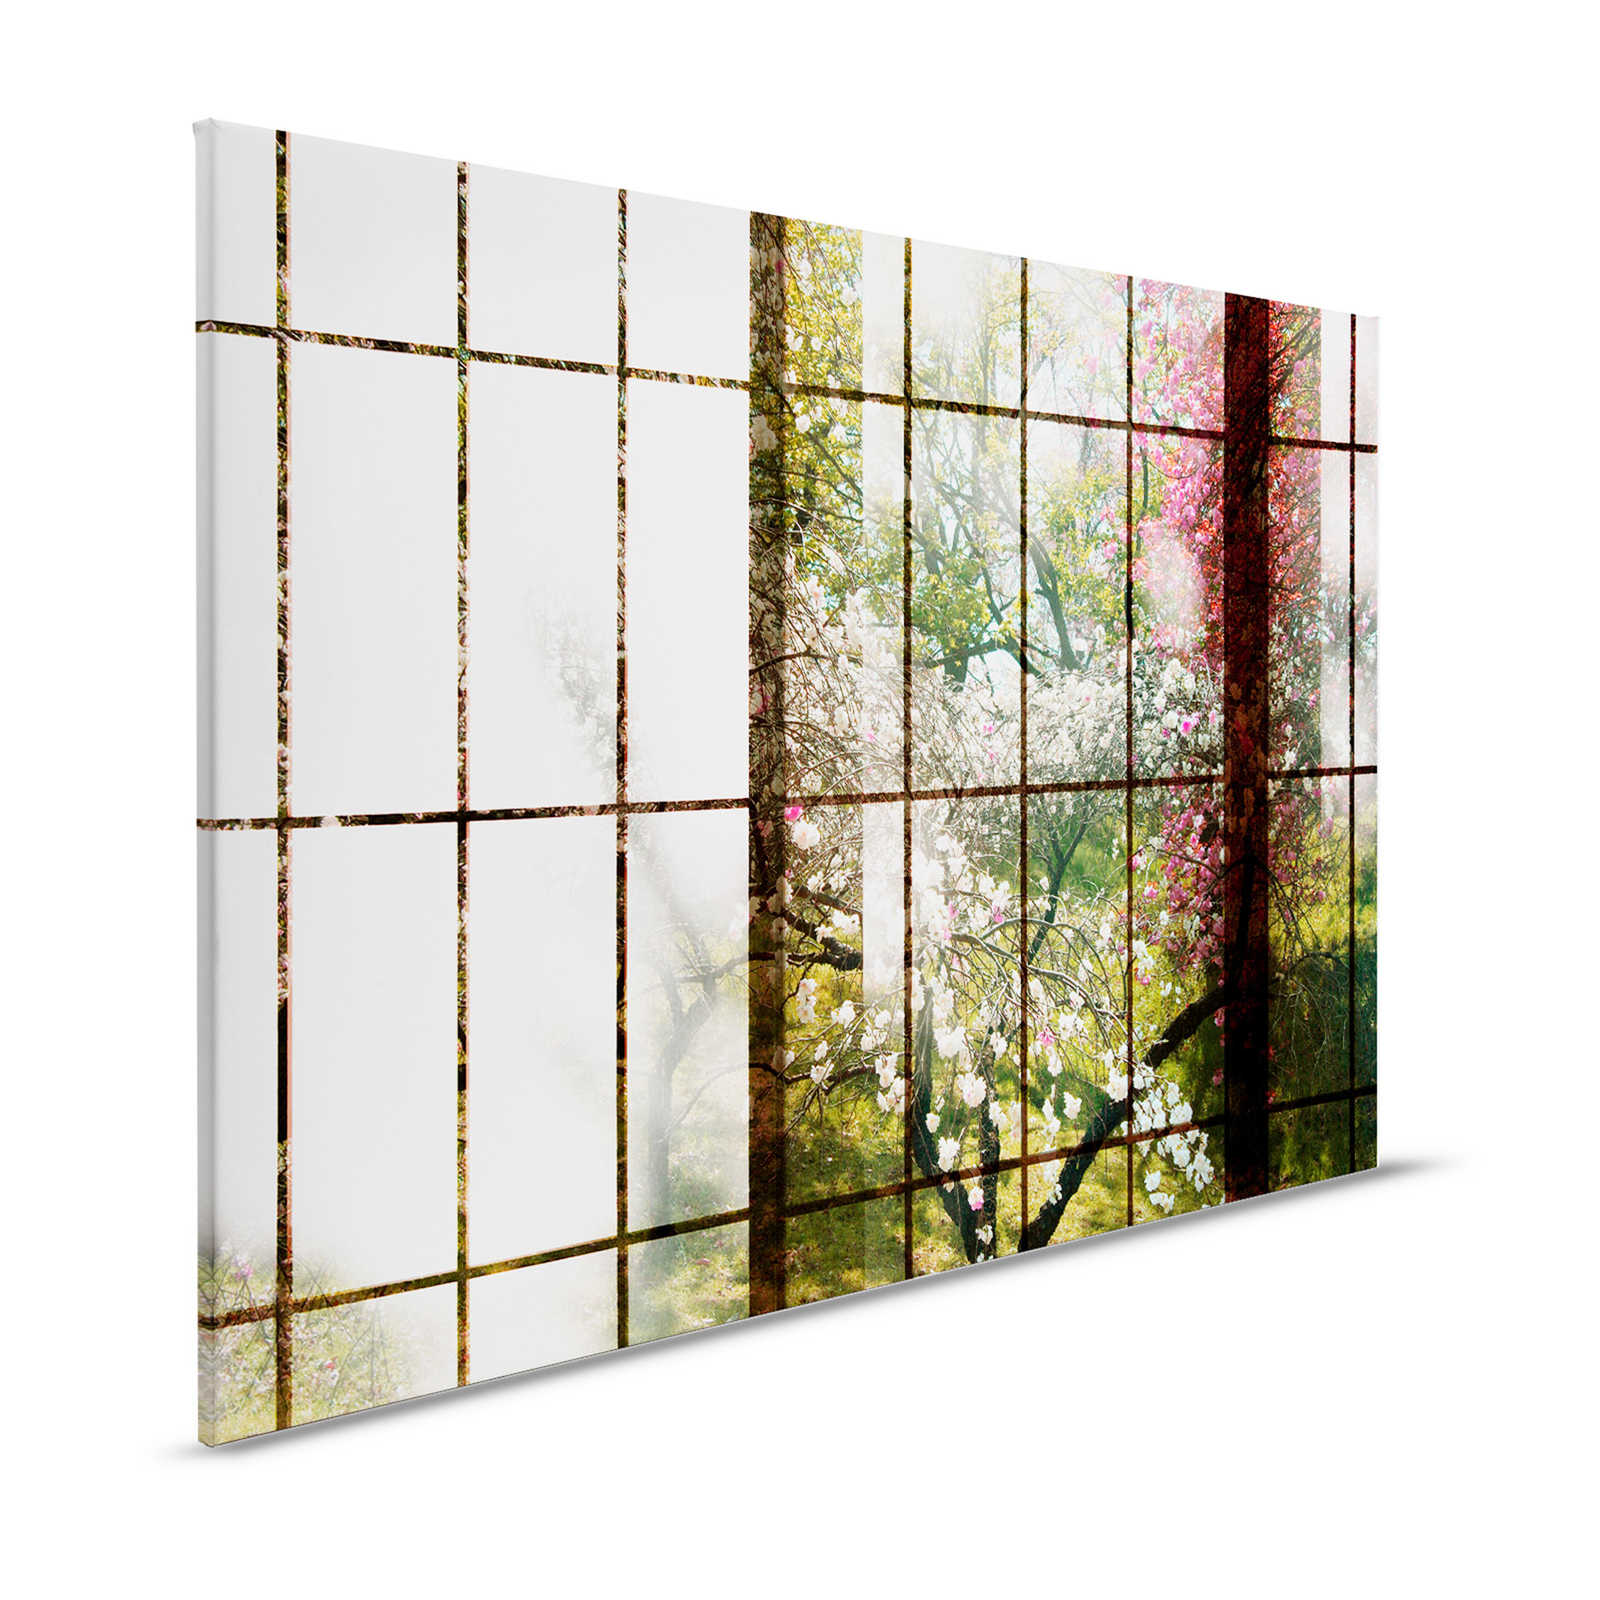 Orchard 1 - Canvas painting, Window with garden view - 1.20 m x 0.80 m
